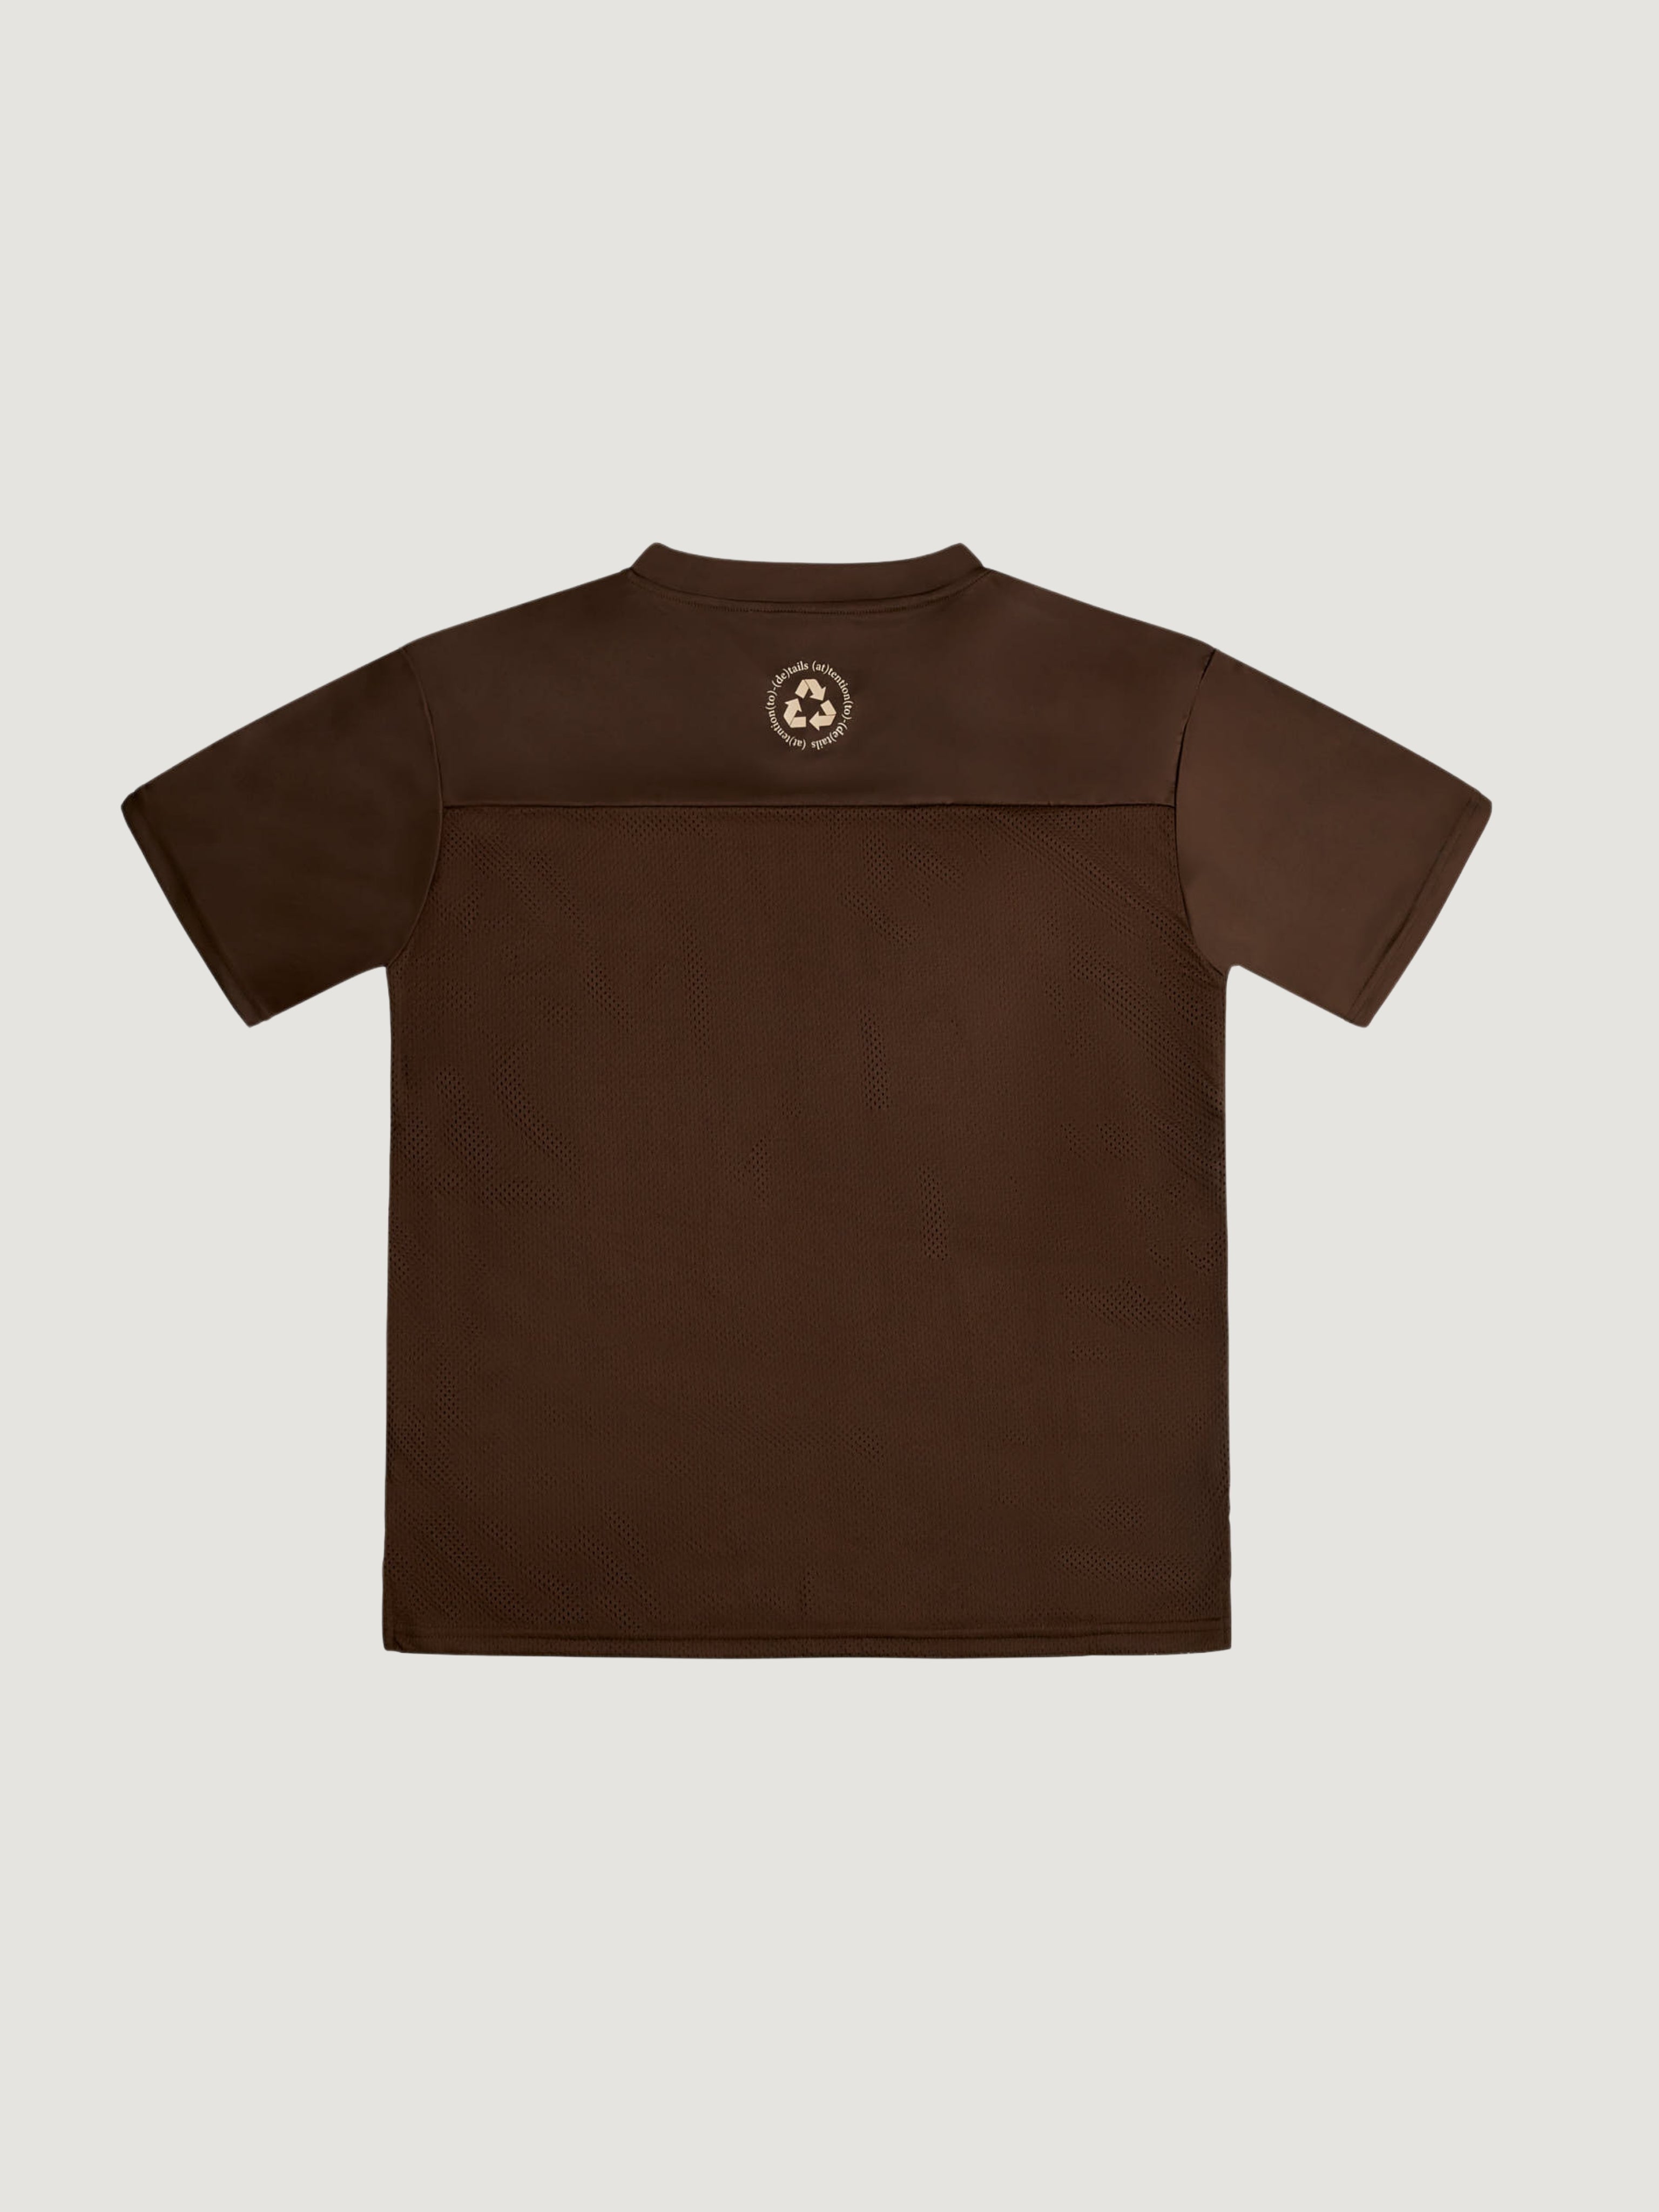 BOXY SPORTS T-SHIRT BROWN - ATTODE